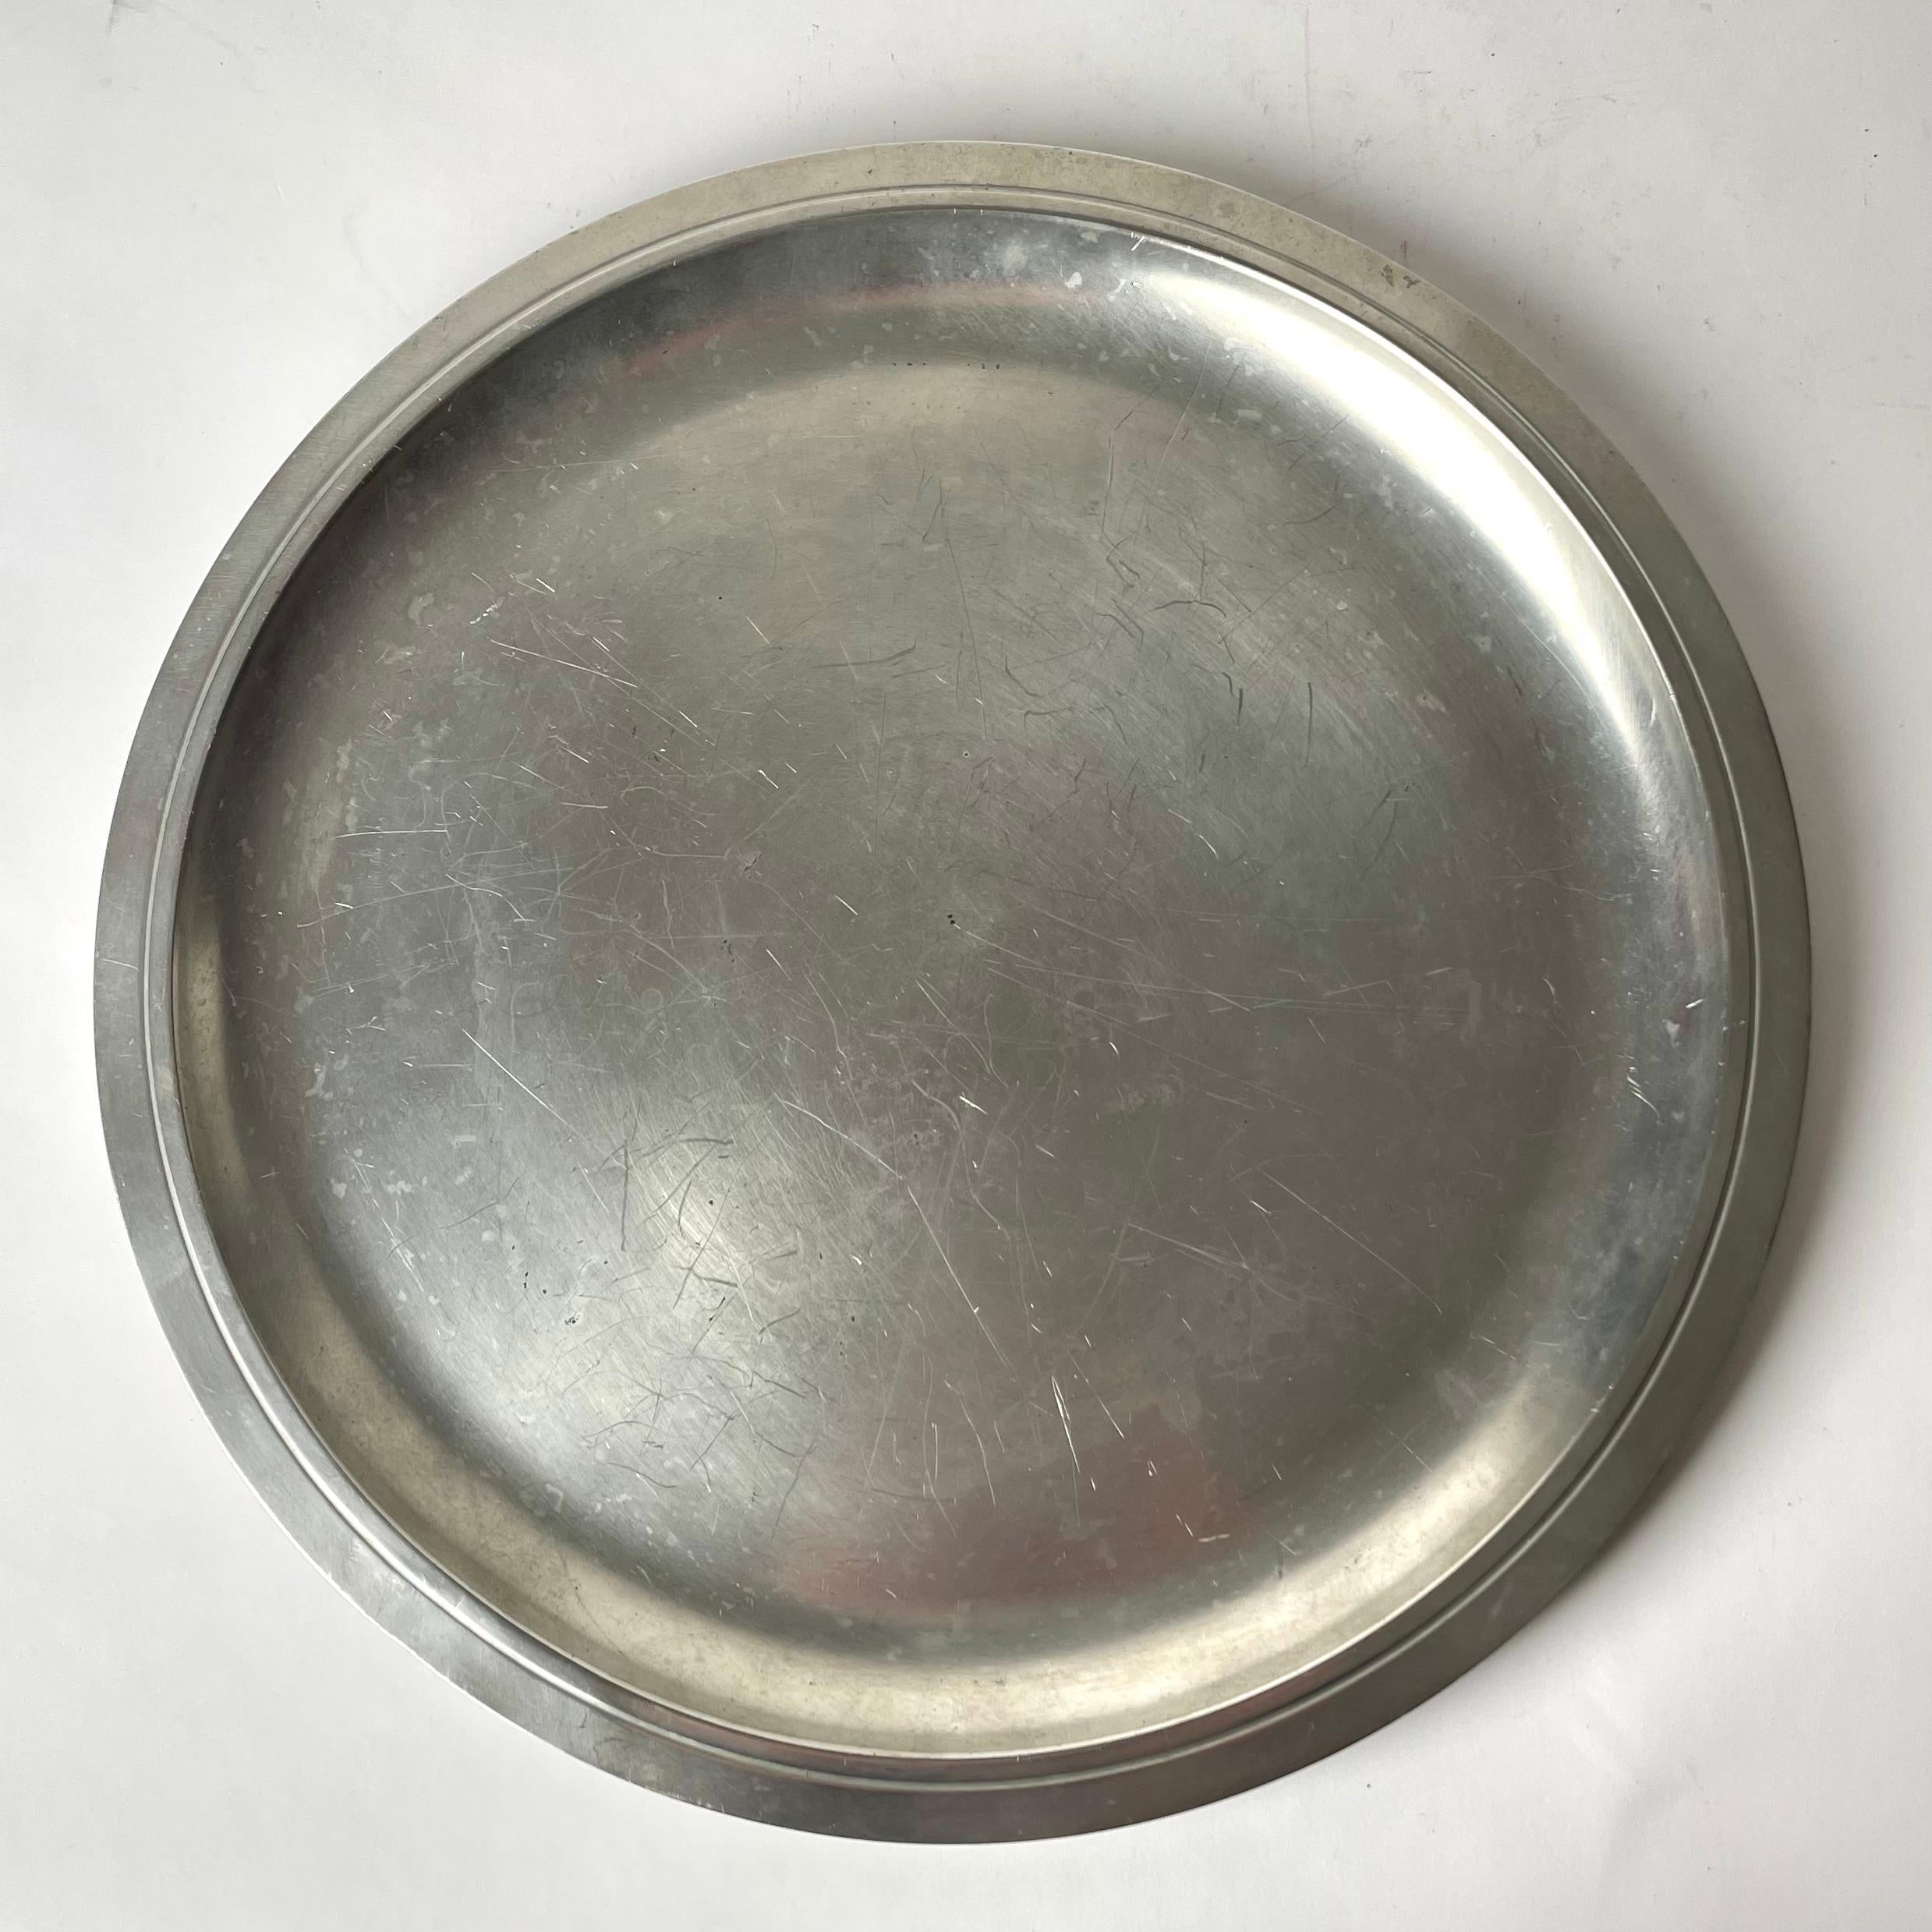 Elegant Tray in pewter from Sweden’s most famous Design Company Firma Svenskt Tenn. Art Deco. This tray is from the year 1934 (H8). Simple beauty with only a stripe as decoration.

Wear consistent with age and use 